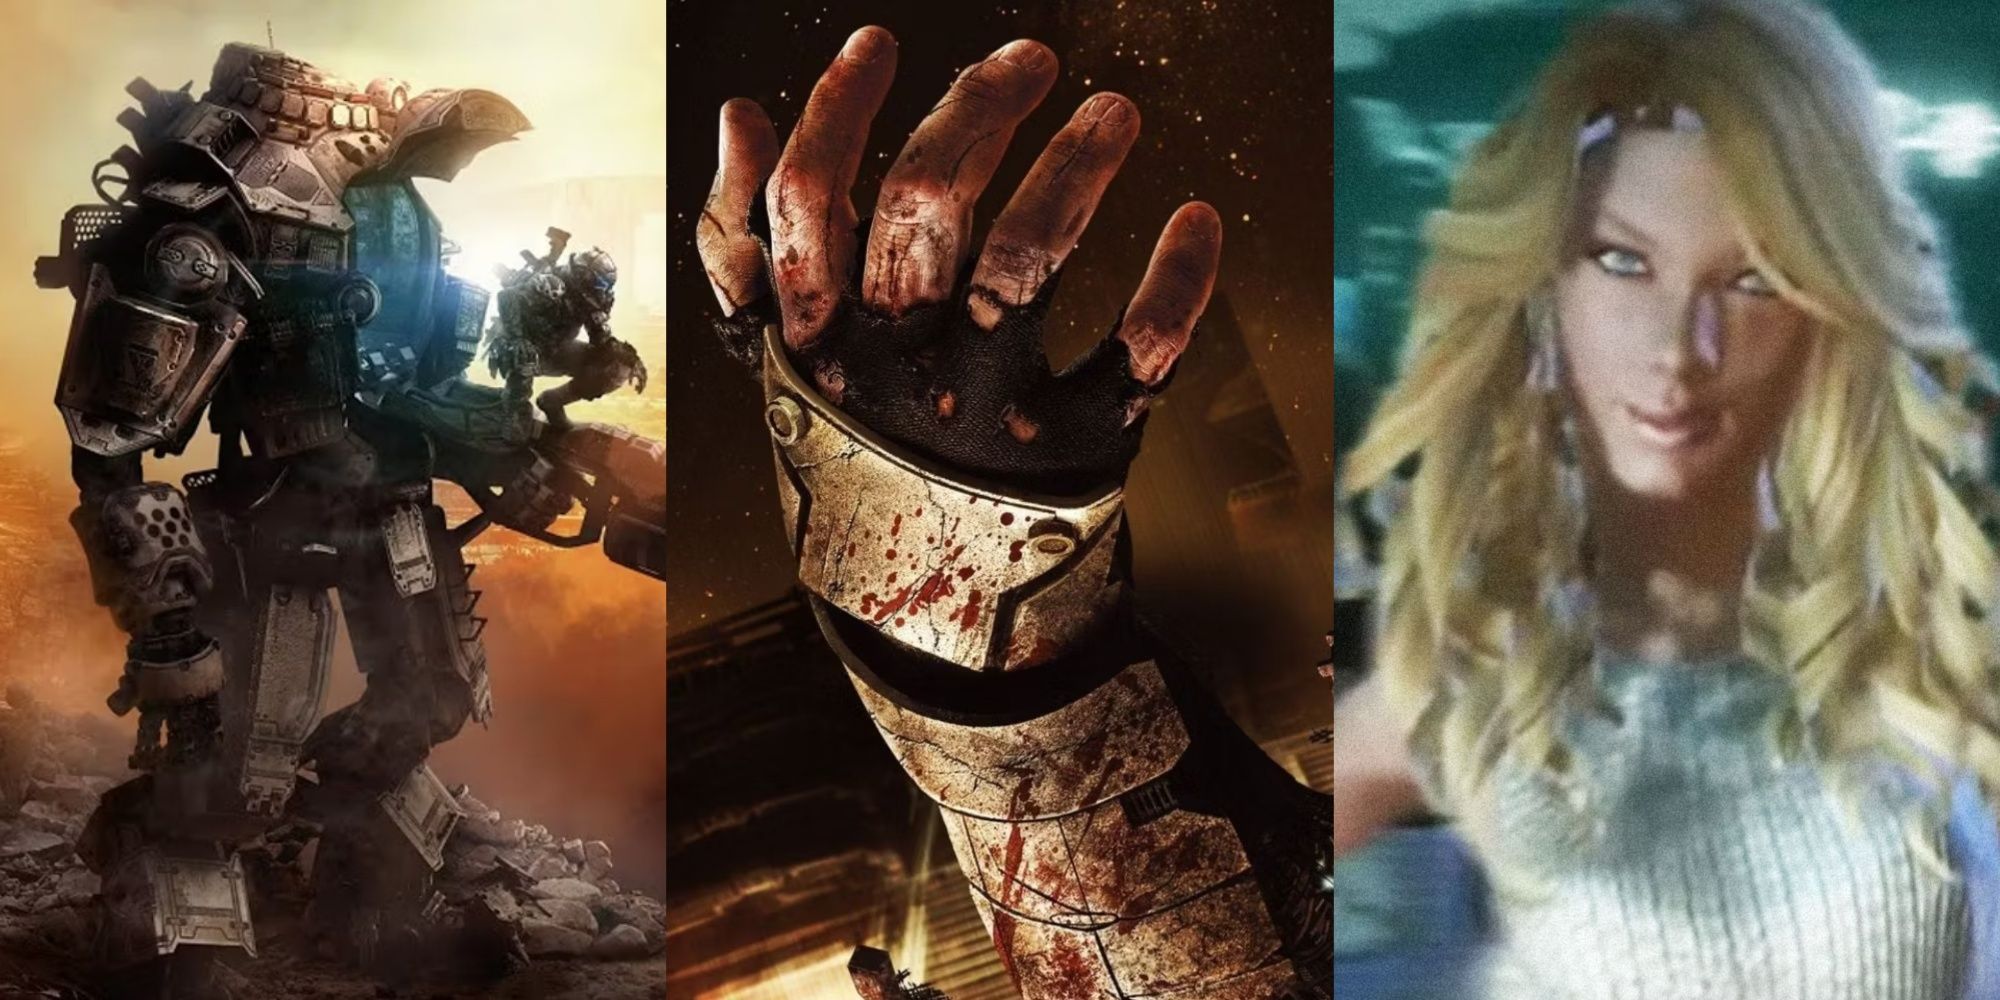 Box art to Titanfall 1 and Dead Space, plus Taylor Swift from Band Hero